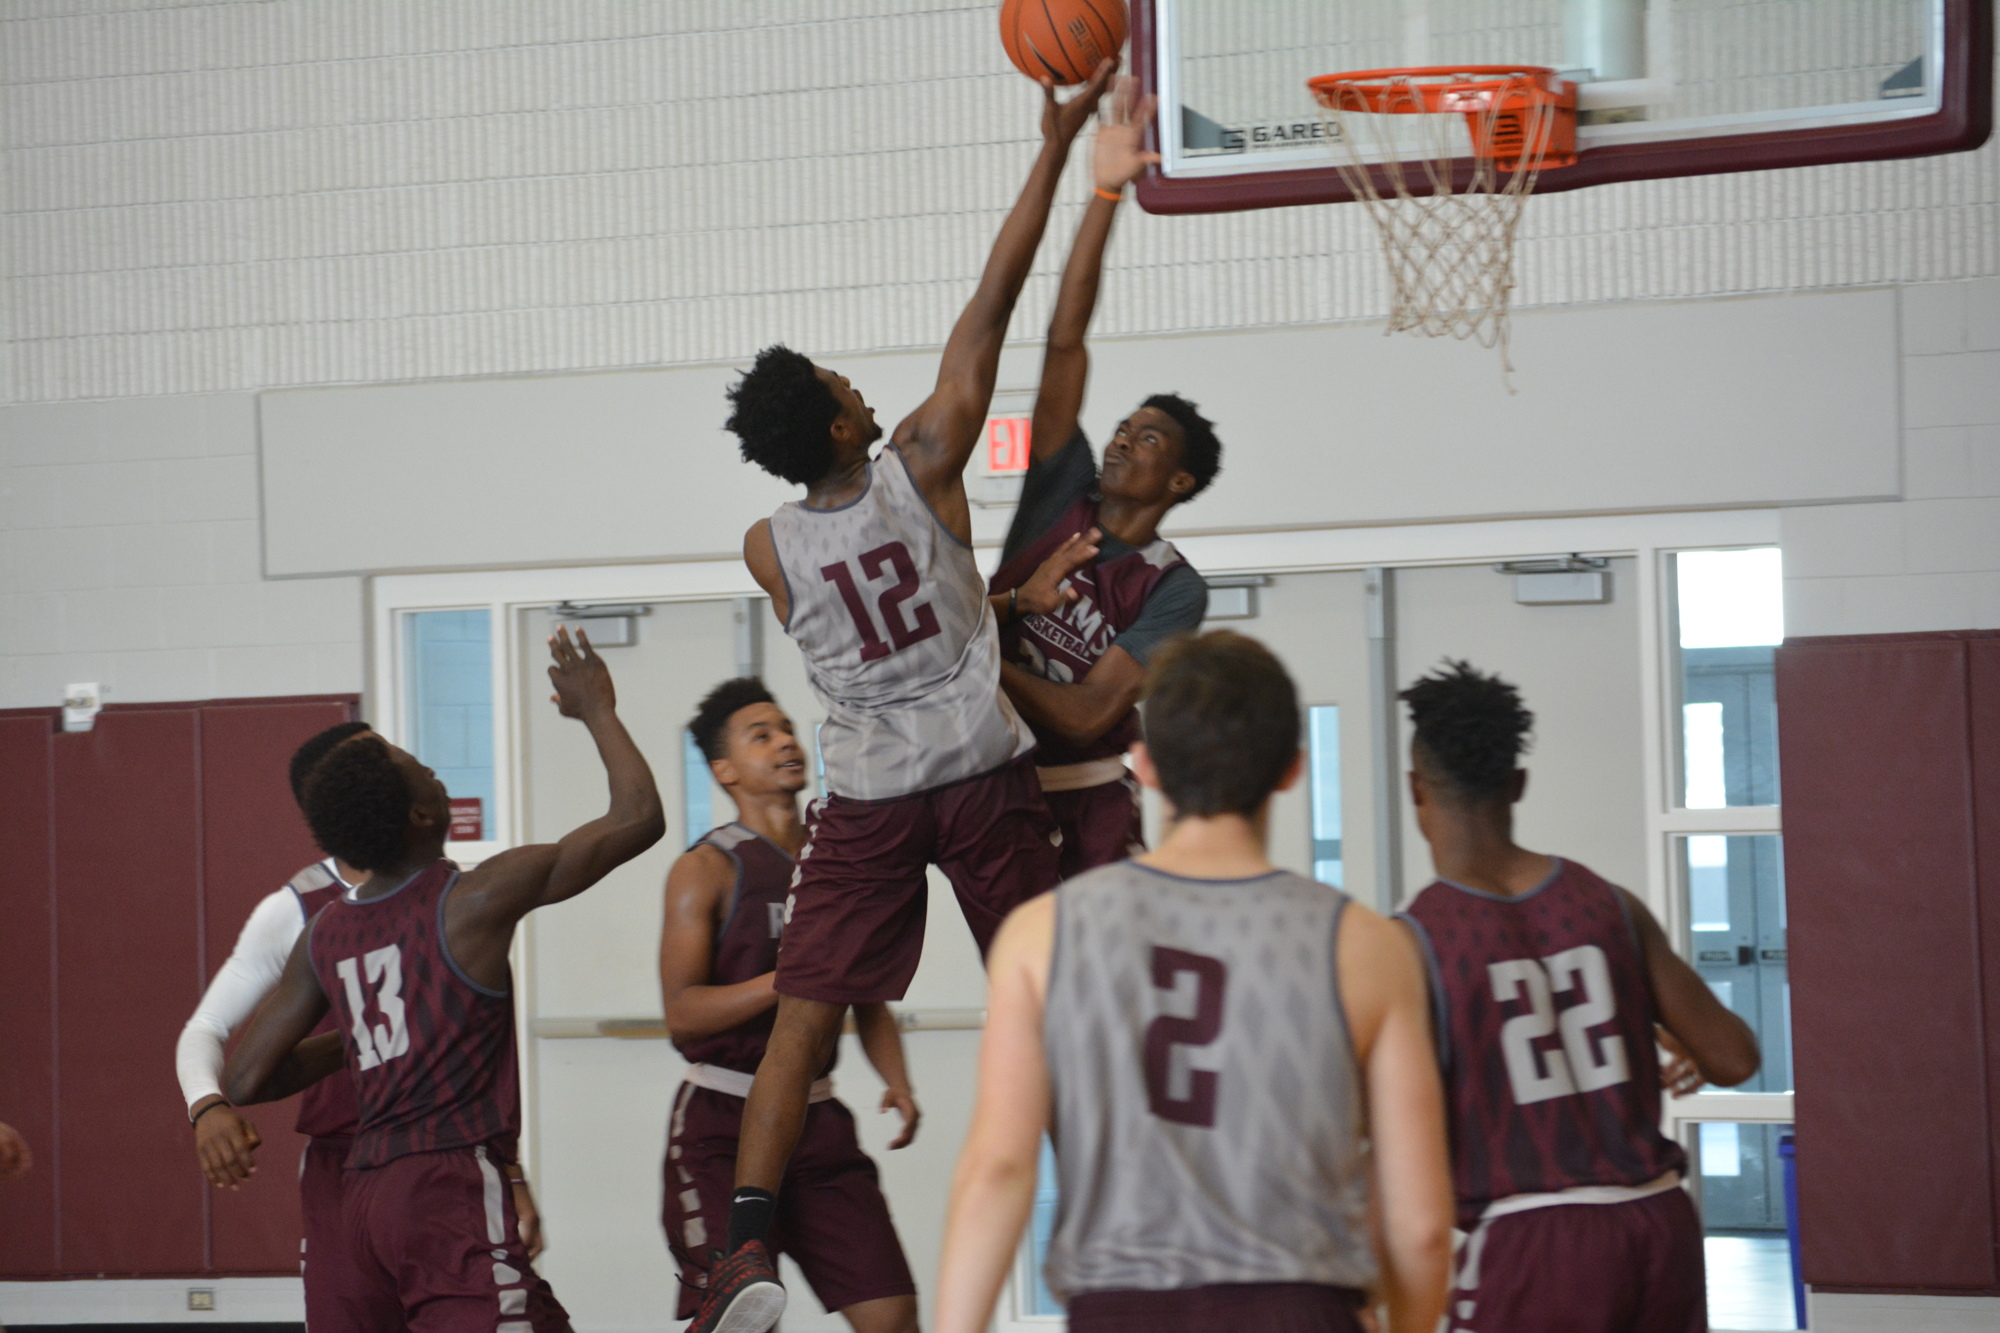 Brion Whitley (#12) puts a layup over a defender during practice.